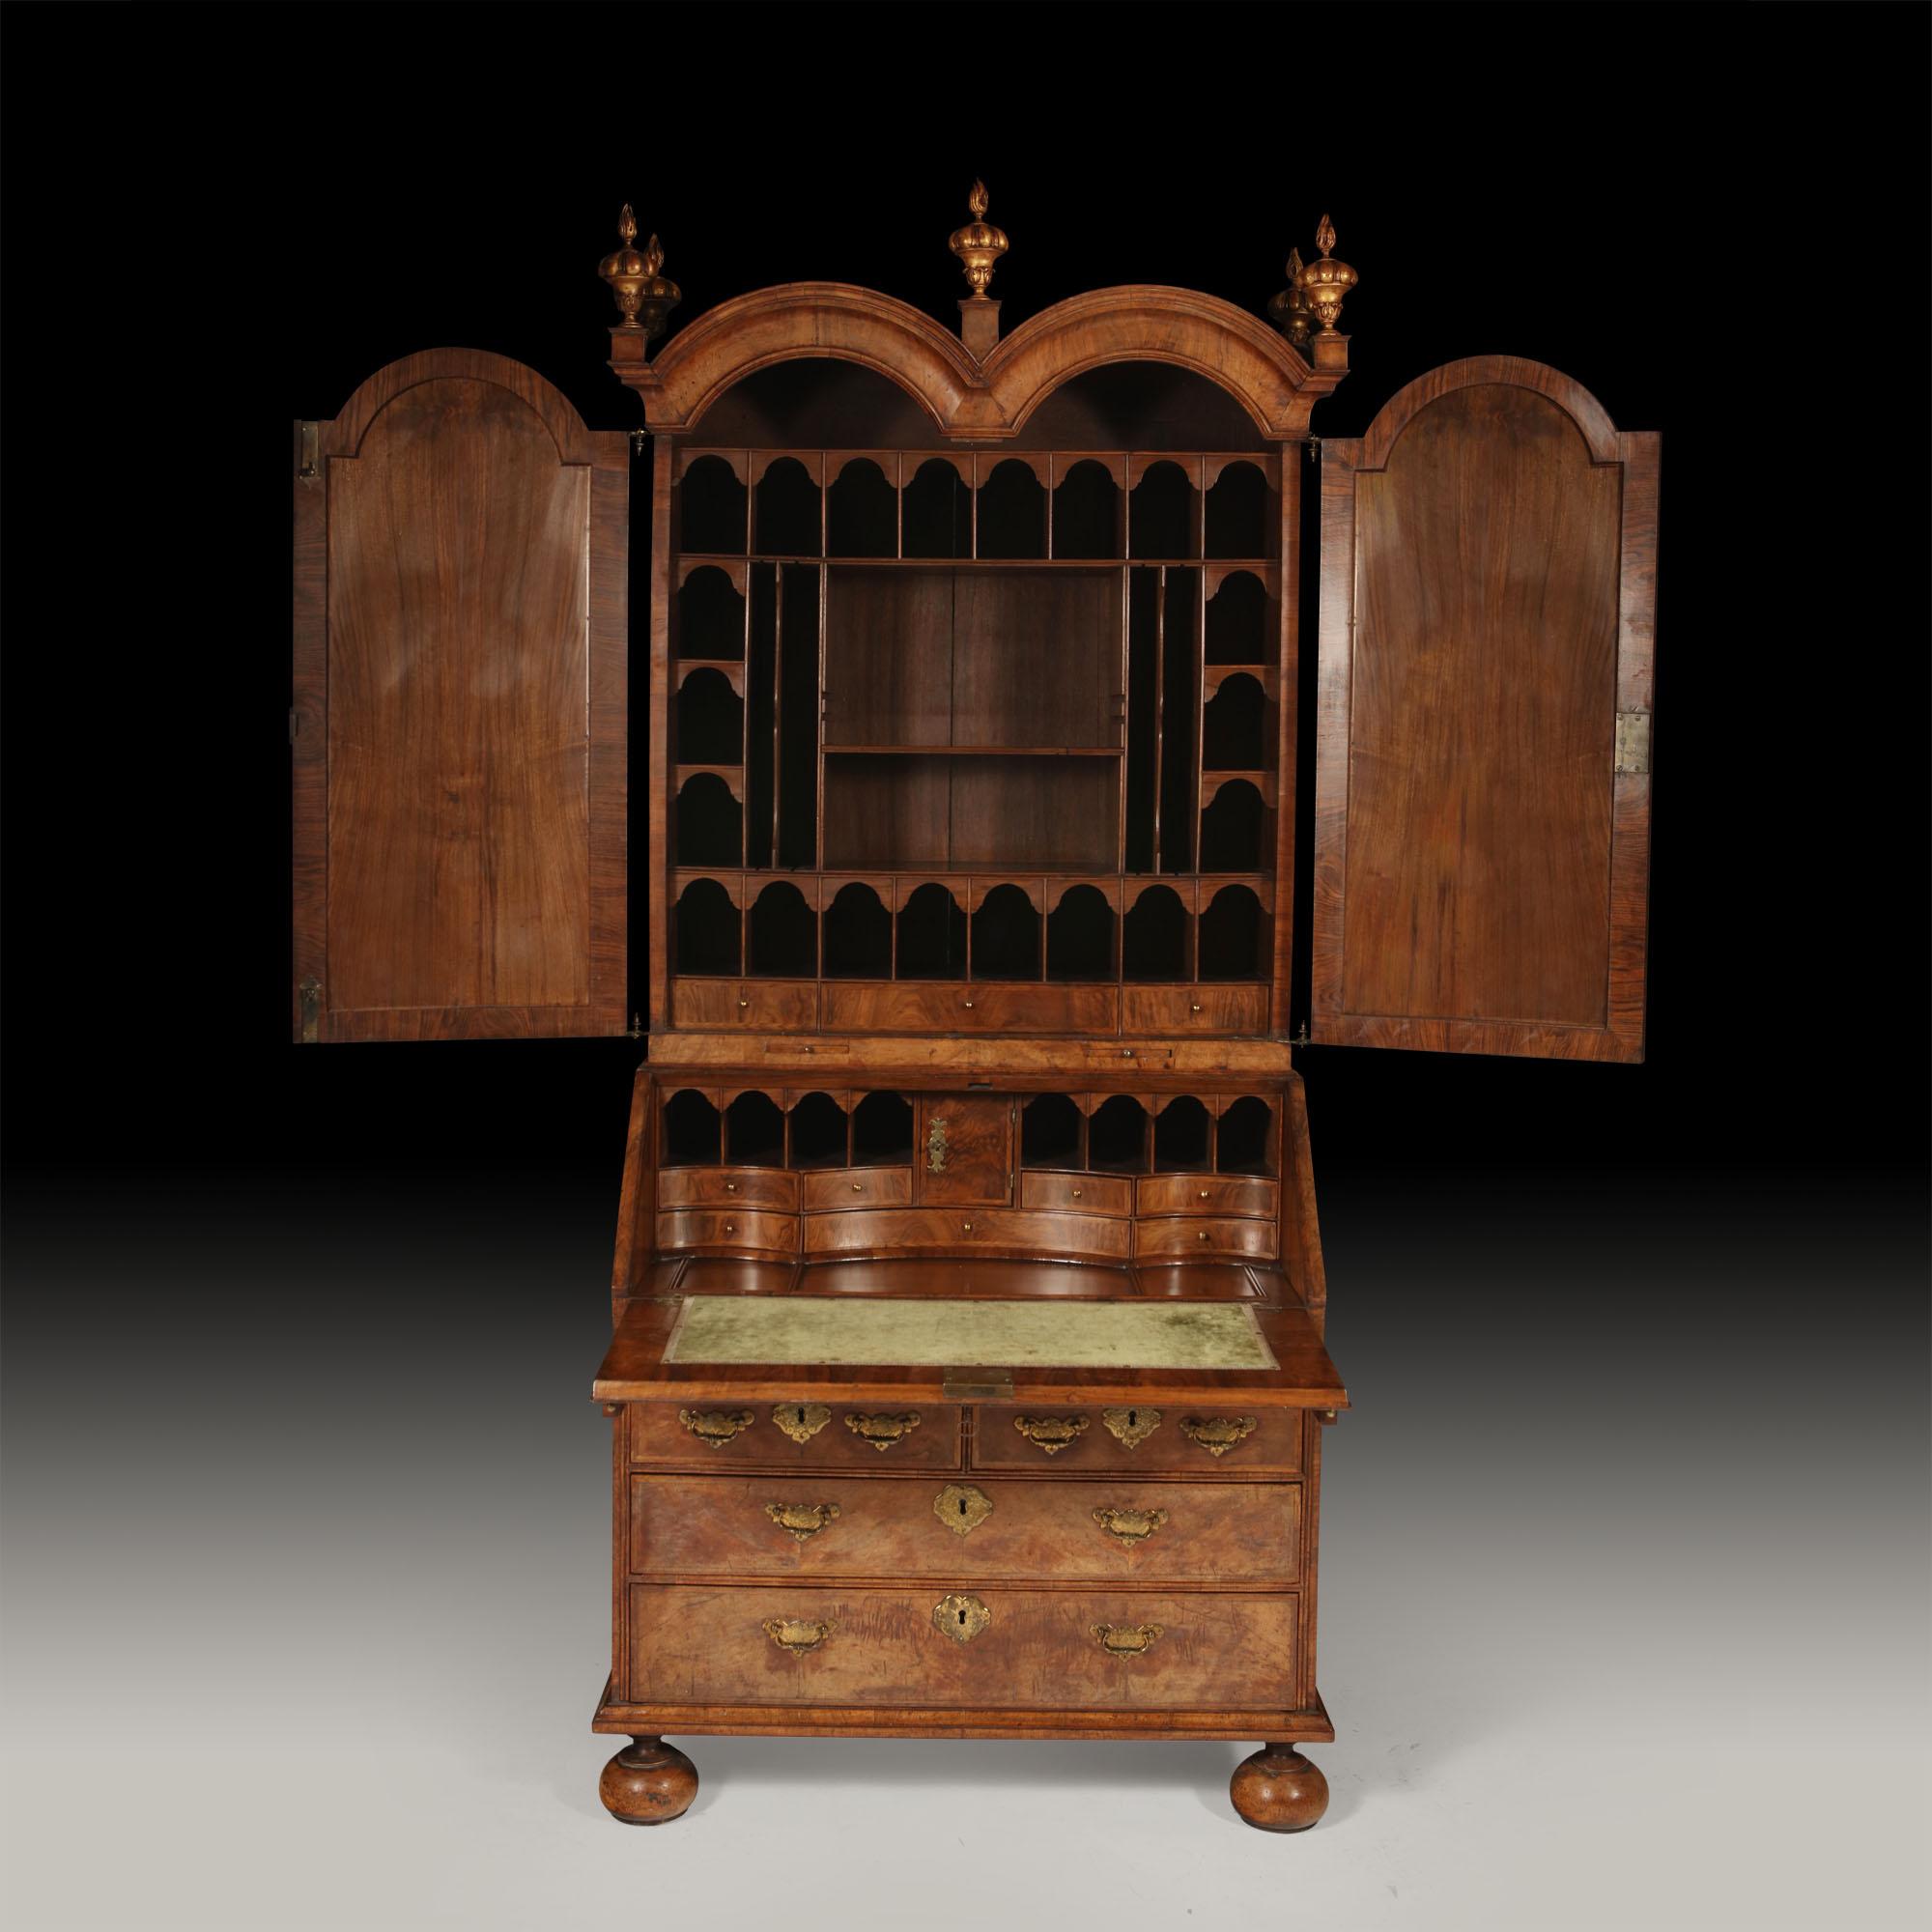 A Queen Anne fully fitted figured-walnut double dome bureau bookcase, circa 1710

The moulded 'double domed' pediment above a pair of mirror panelled doors, opens to a fully fitted divided interior incorporating small feather-banded figured walnut